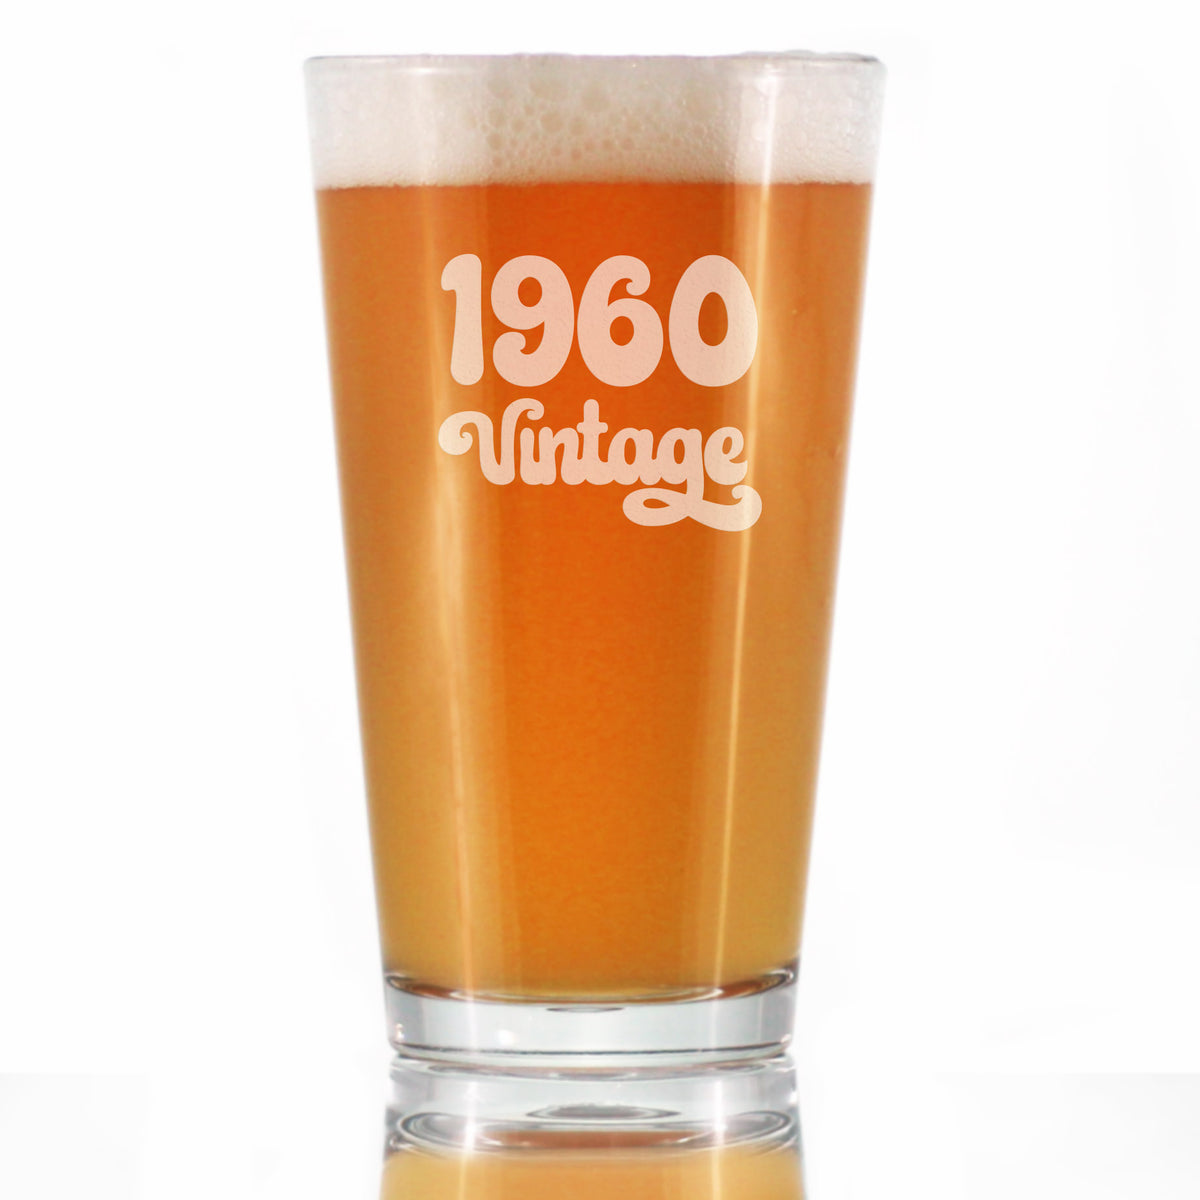 Vintage 1960 - Pint Glass for Beer - 63rd Birthday Gifts for Men or Women Turning 63 - Fun Bday Party Decor - 16 oz